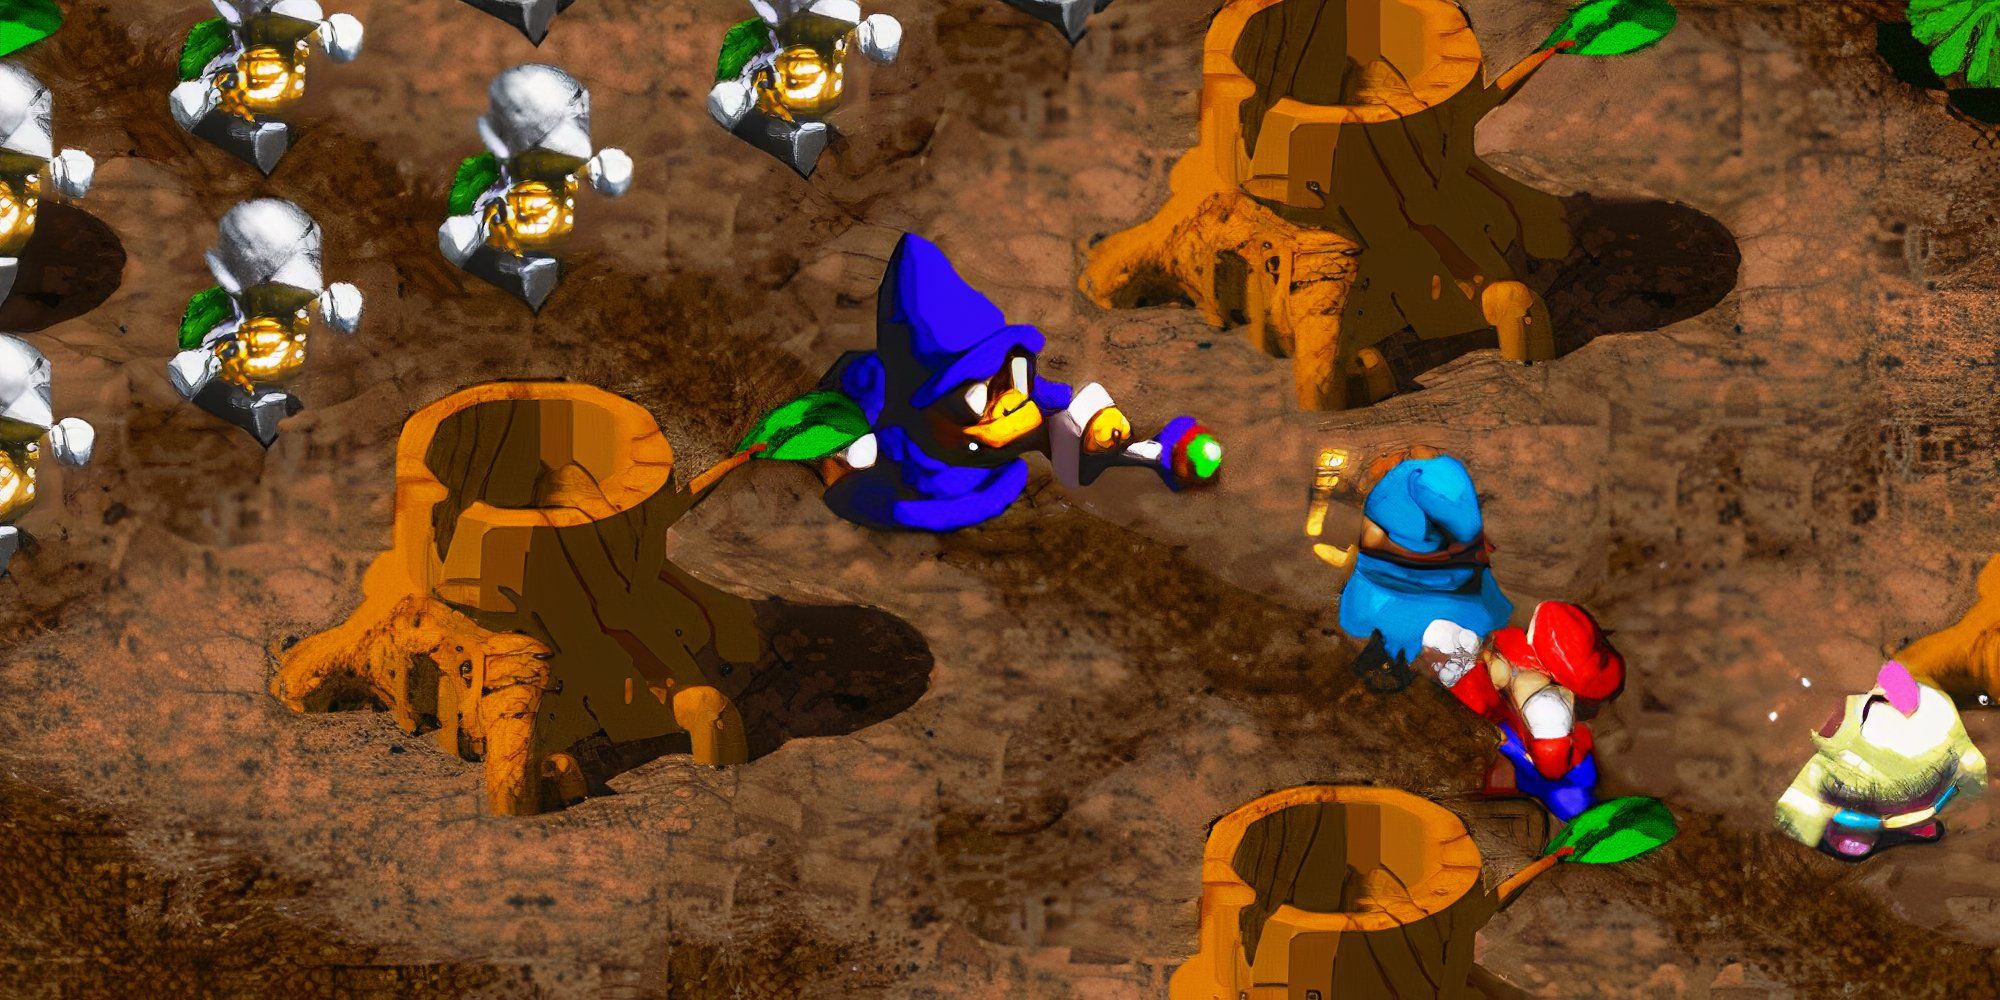 A scene featuring characters in Super Mario RPG Legend of the Seven Stars